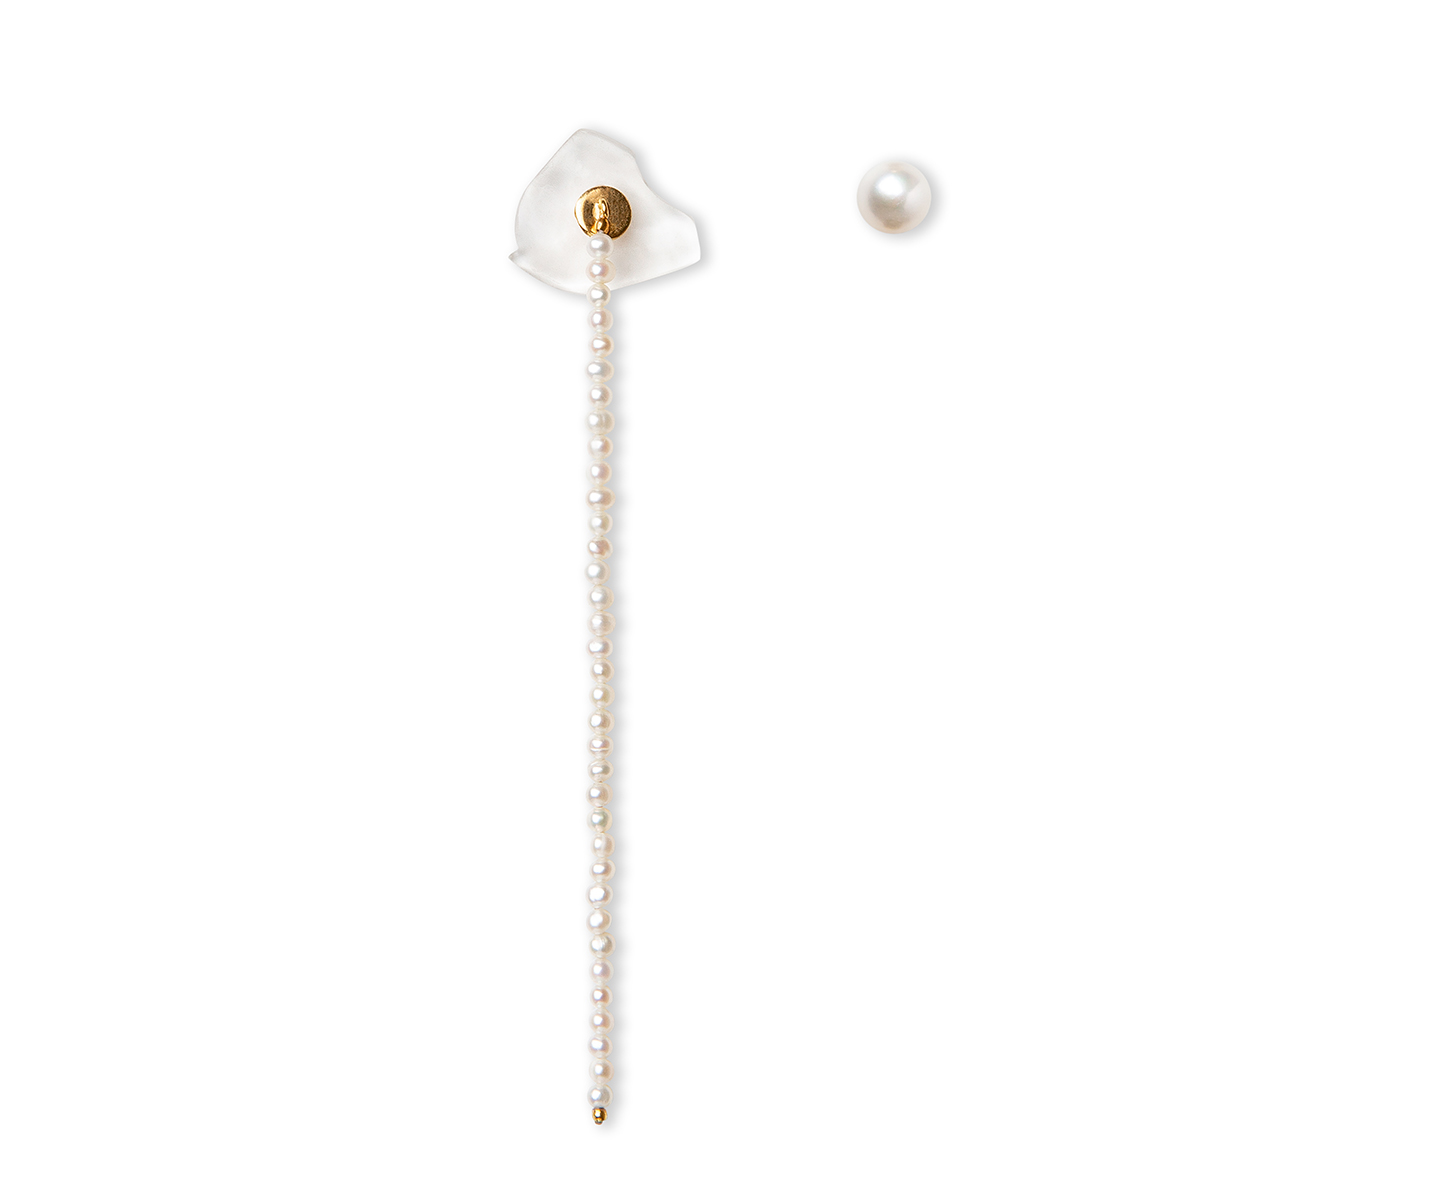 Long gold earrings with pearl chain and false dilation with transparent quartz